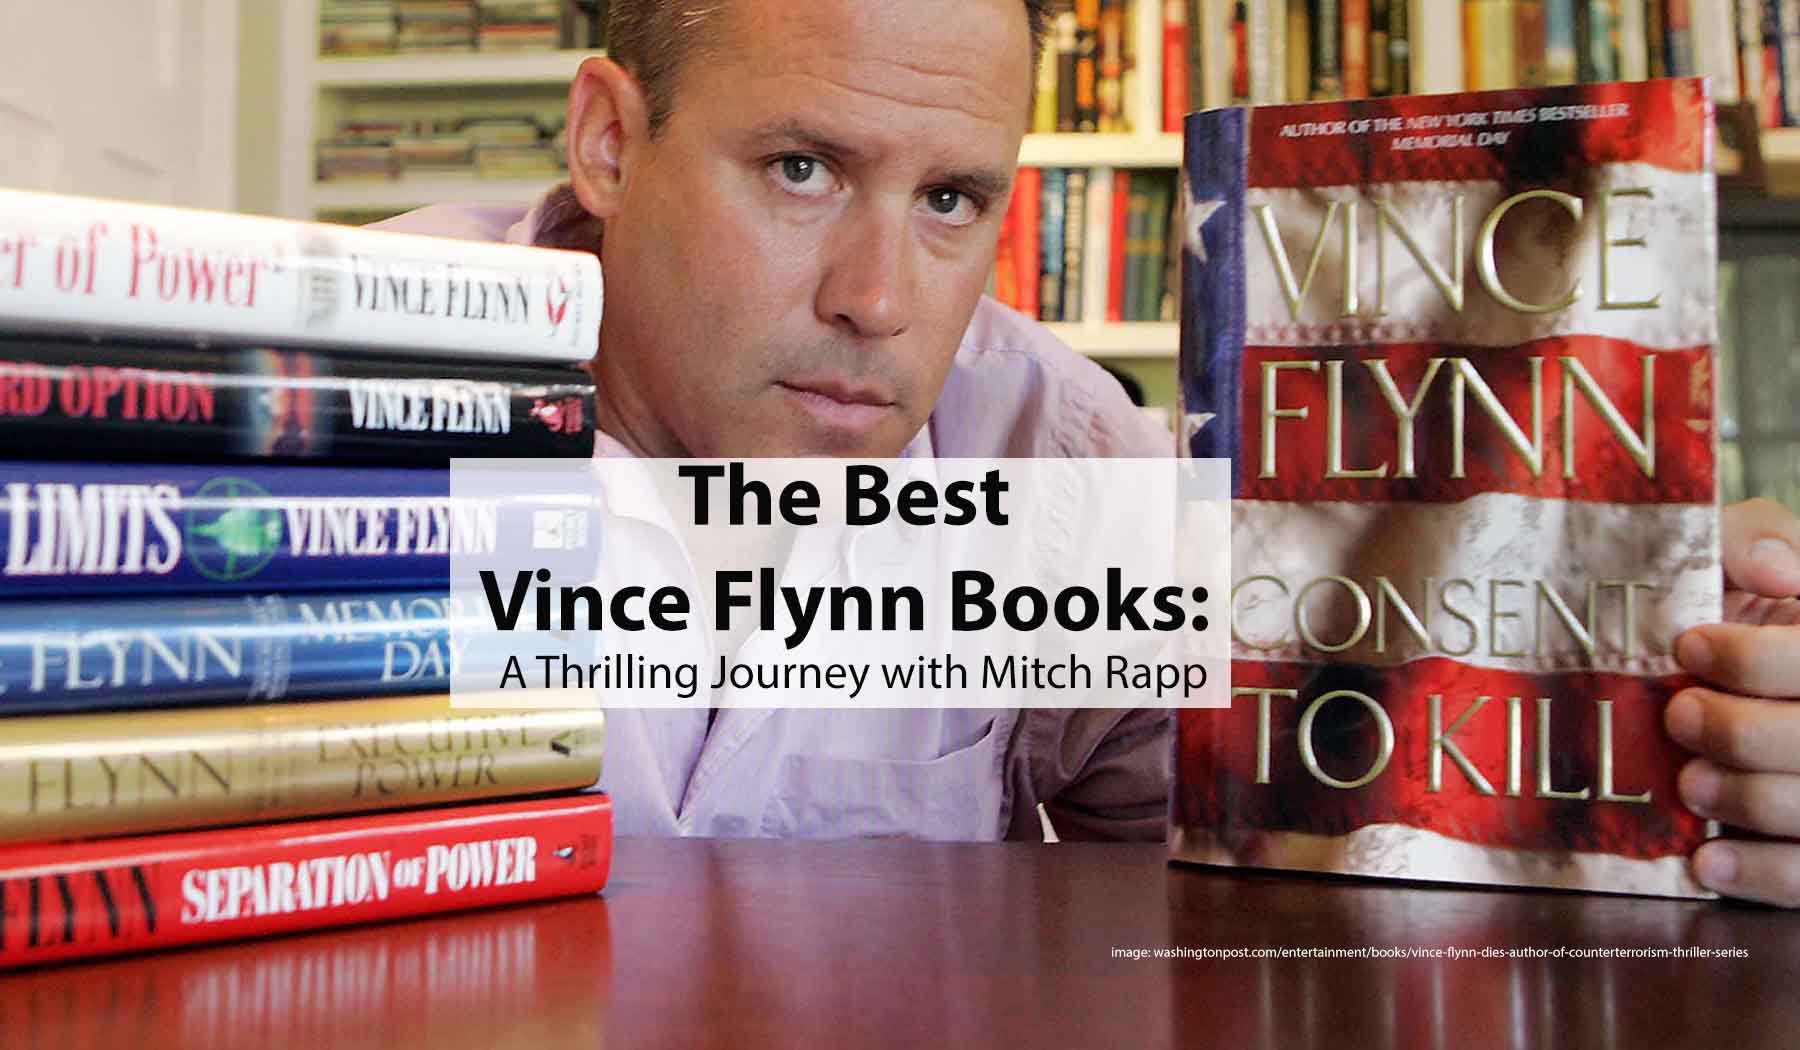 The Best Vince Flynn Books A Thrilling Journey with Mitch Rapp